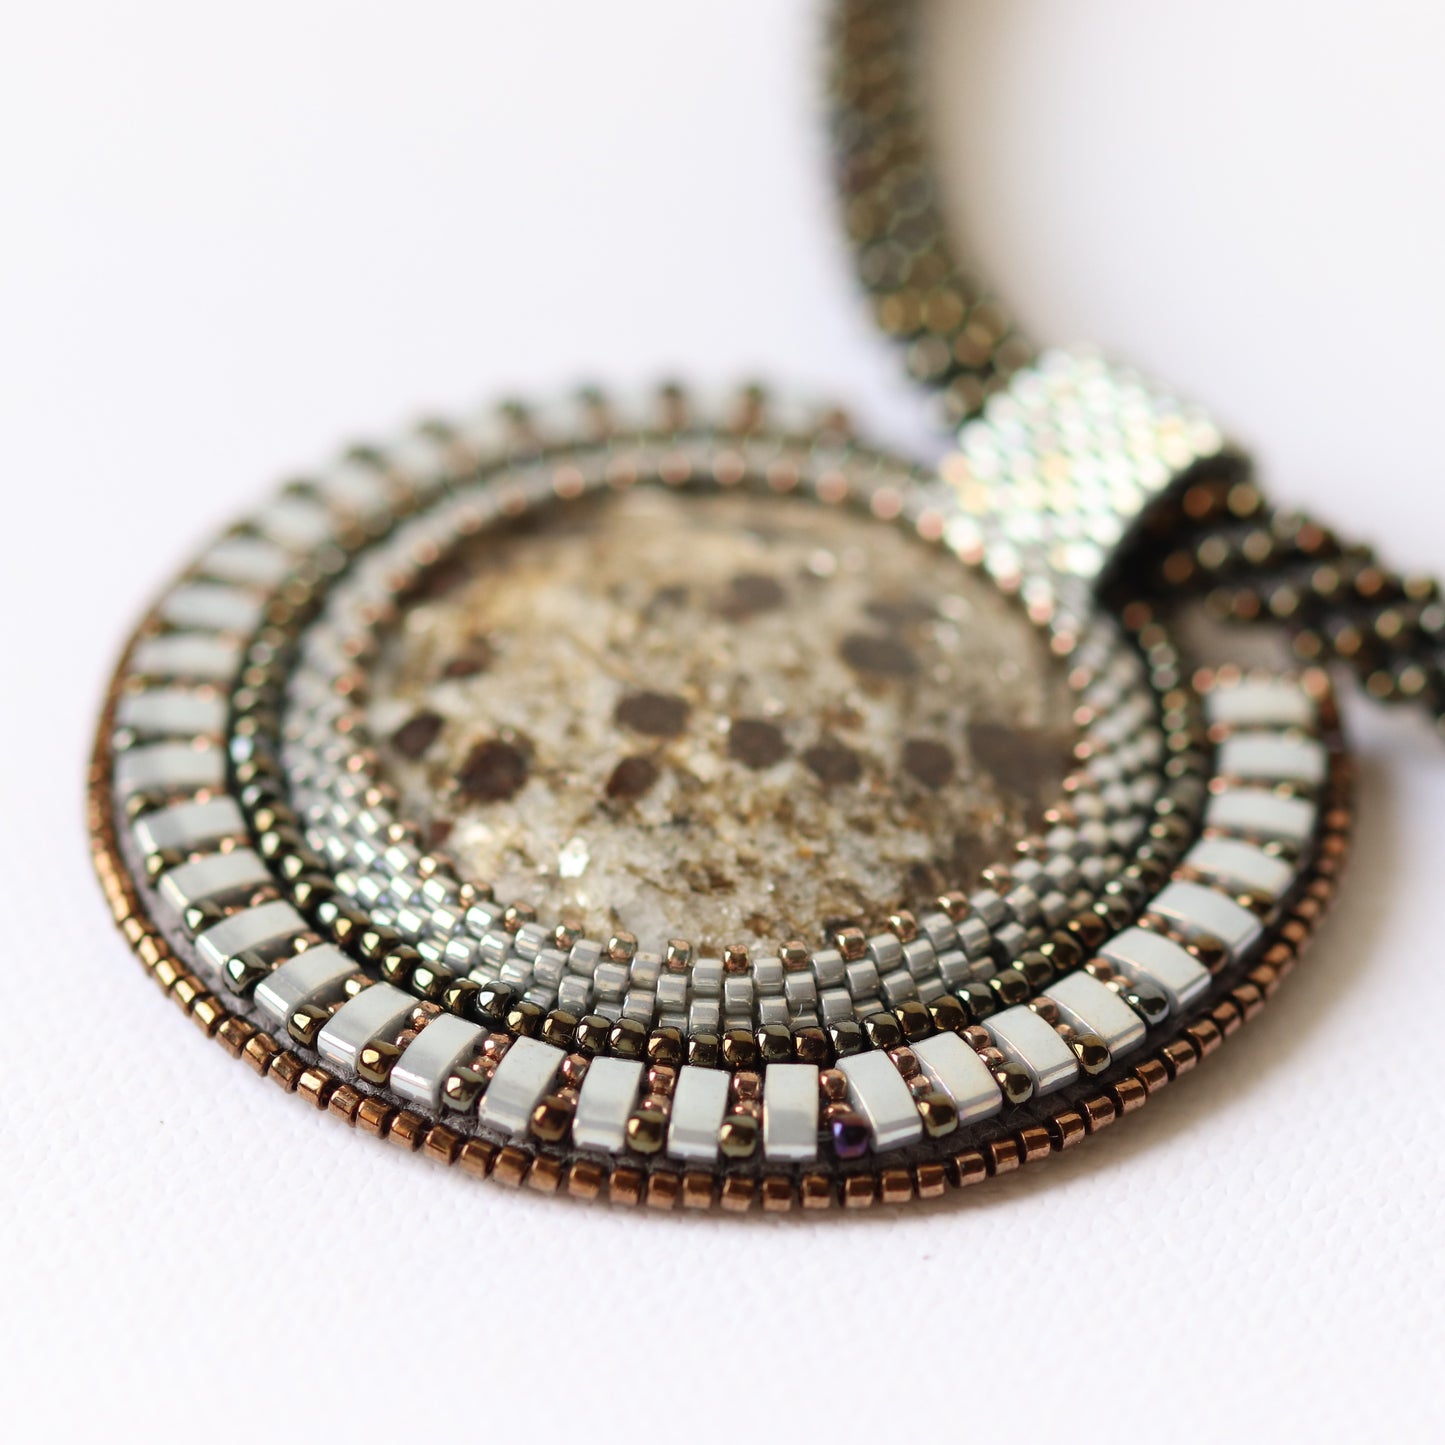 Embroidered necklace with mica schist (mica and garnet)